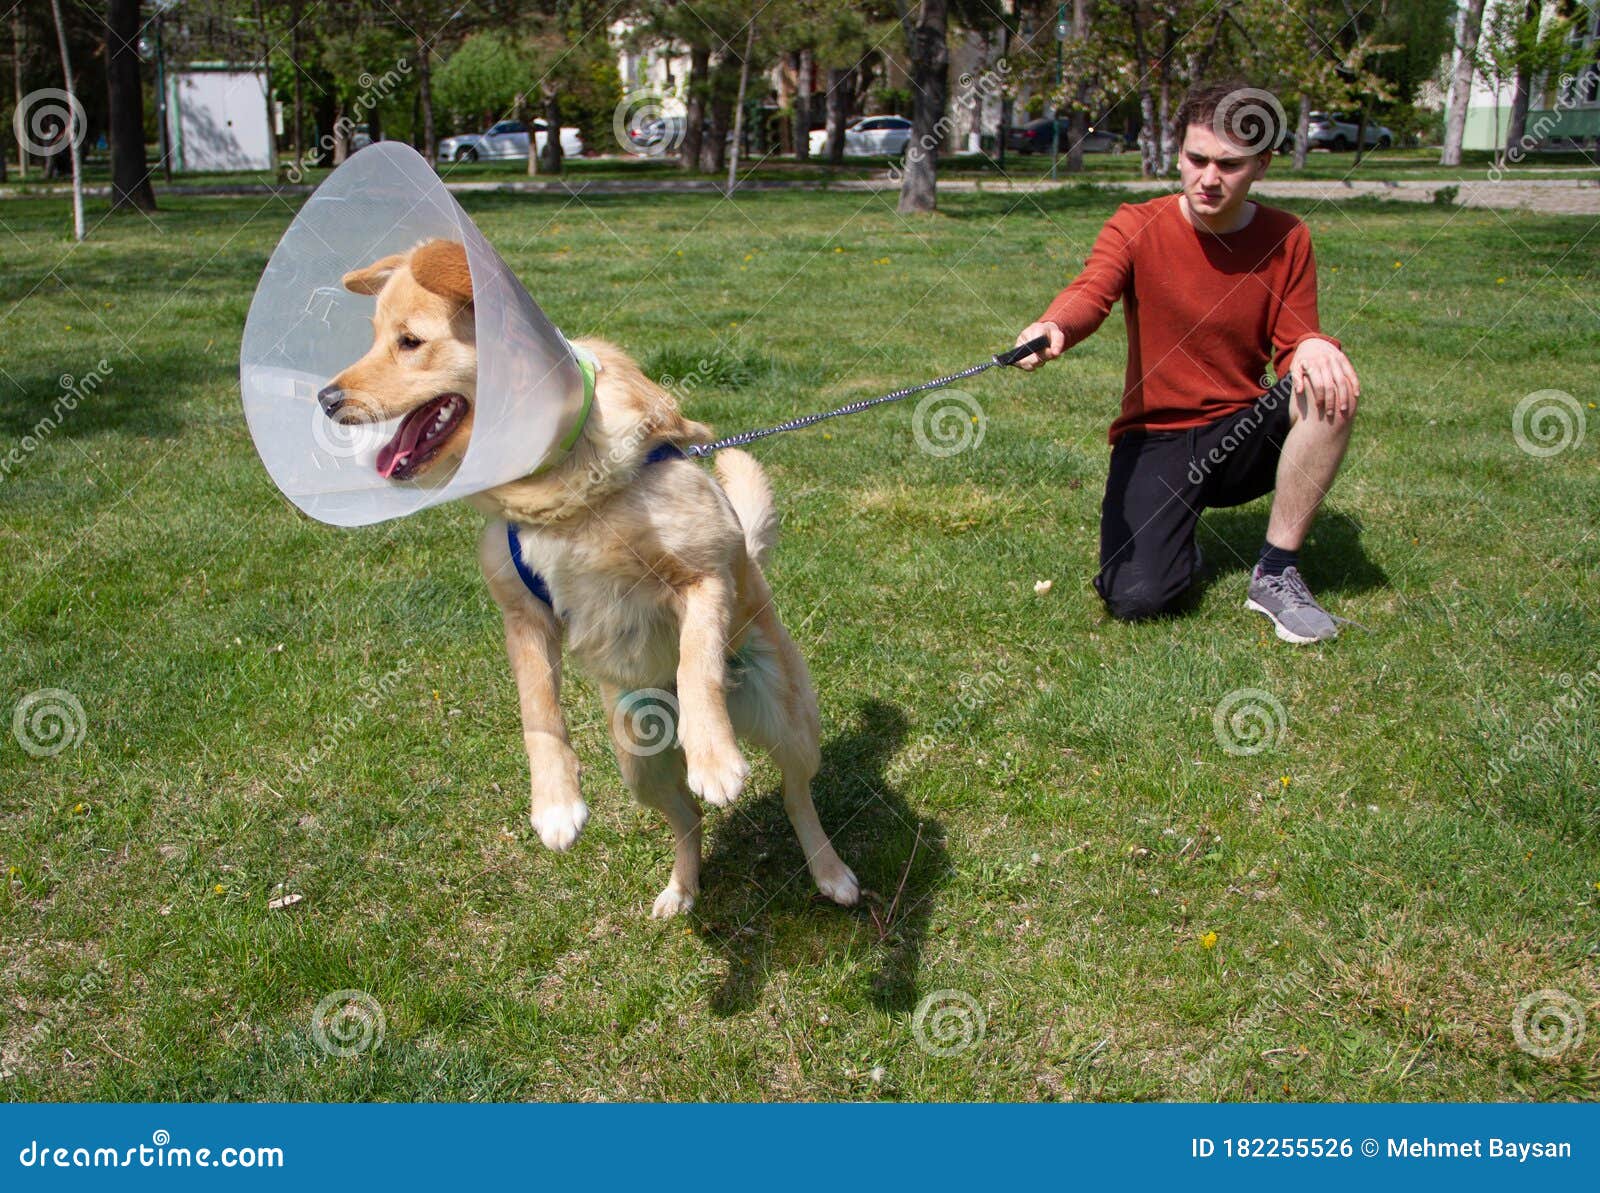 231 Golden Retriever Angry Photos Free Royalty Free Stock Photos From Dreamstime